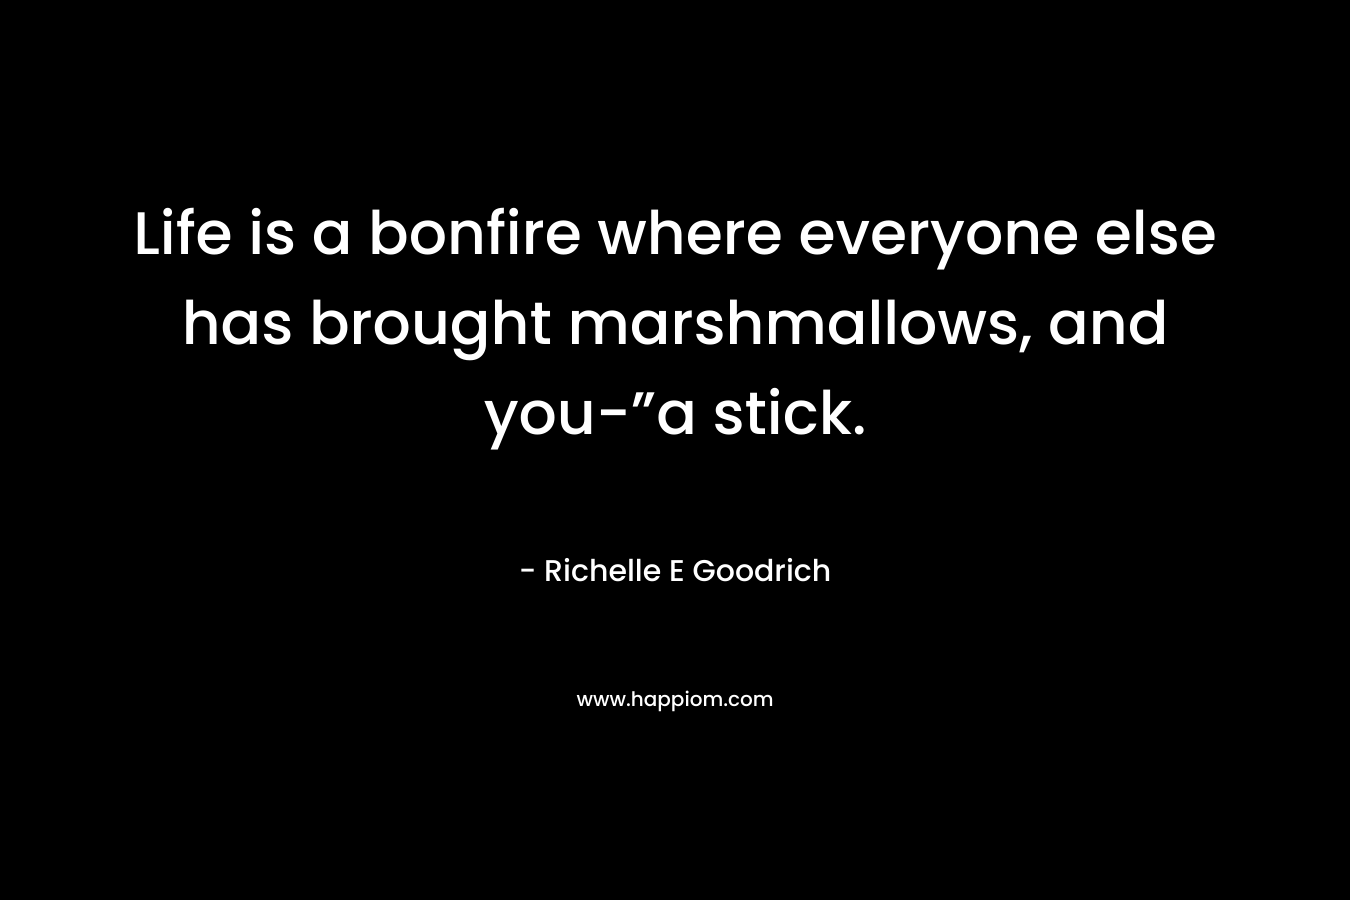 Life is a bonfire where everyone else has brought marshmallows, and you-”a stick. – Richelle E Goodrich